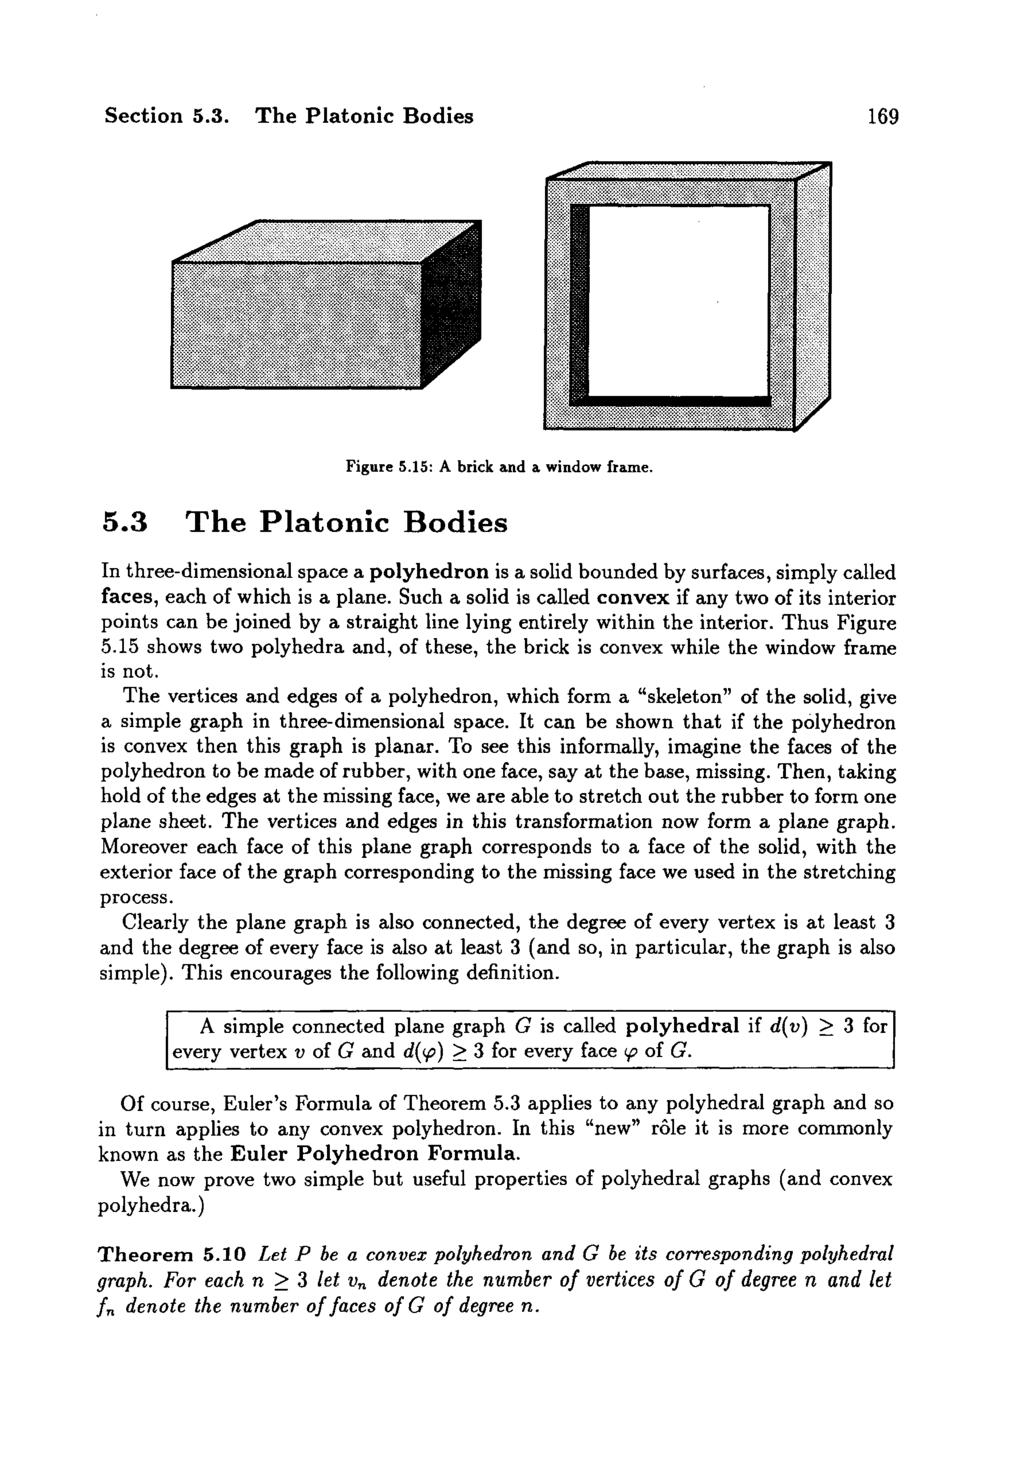 Section 5.3. The Platonic Bodies 169 <* > Figure 5.15: A brick and a window frame. 5.3 The Platonic Bodies v In three-dimensional space a polyhedron is a solid bounded by surfaces, simply called faces, each of which is a plane.